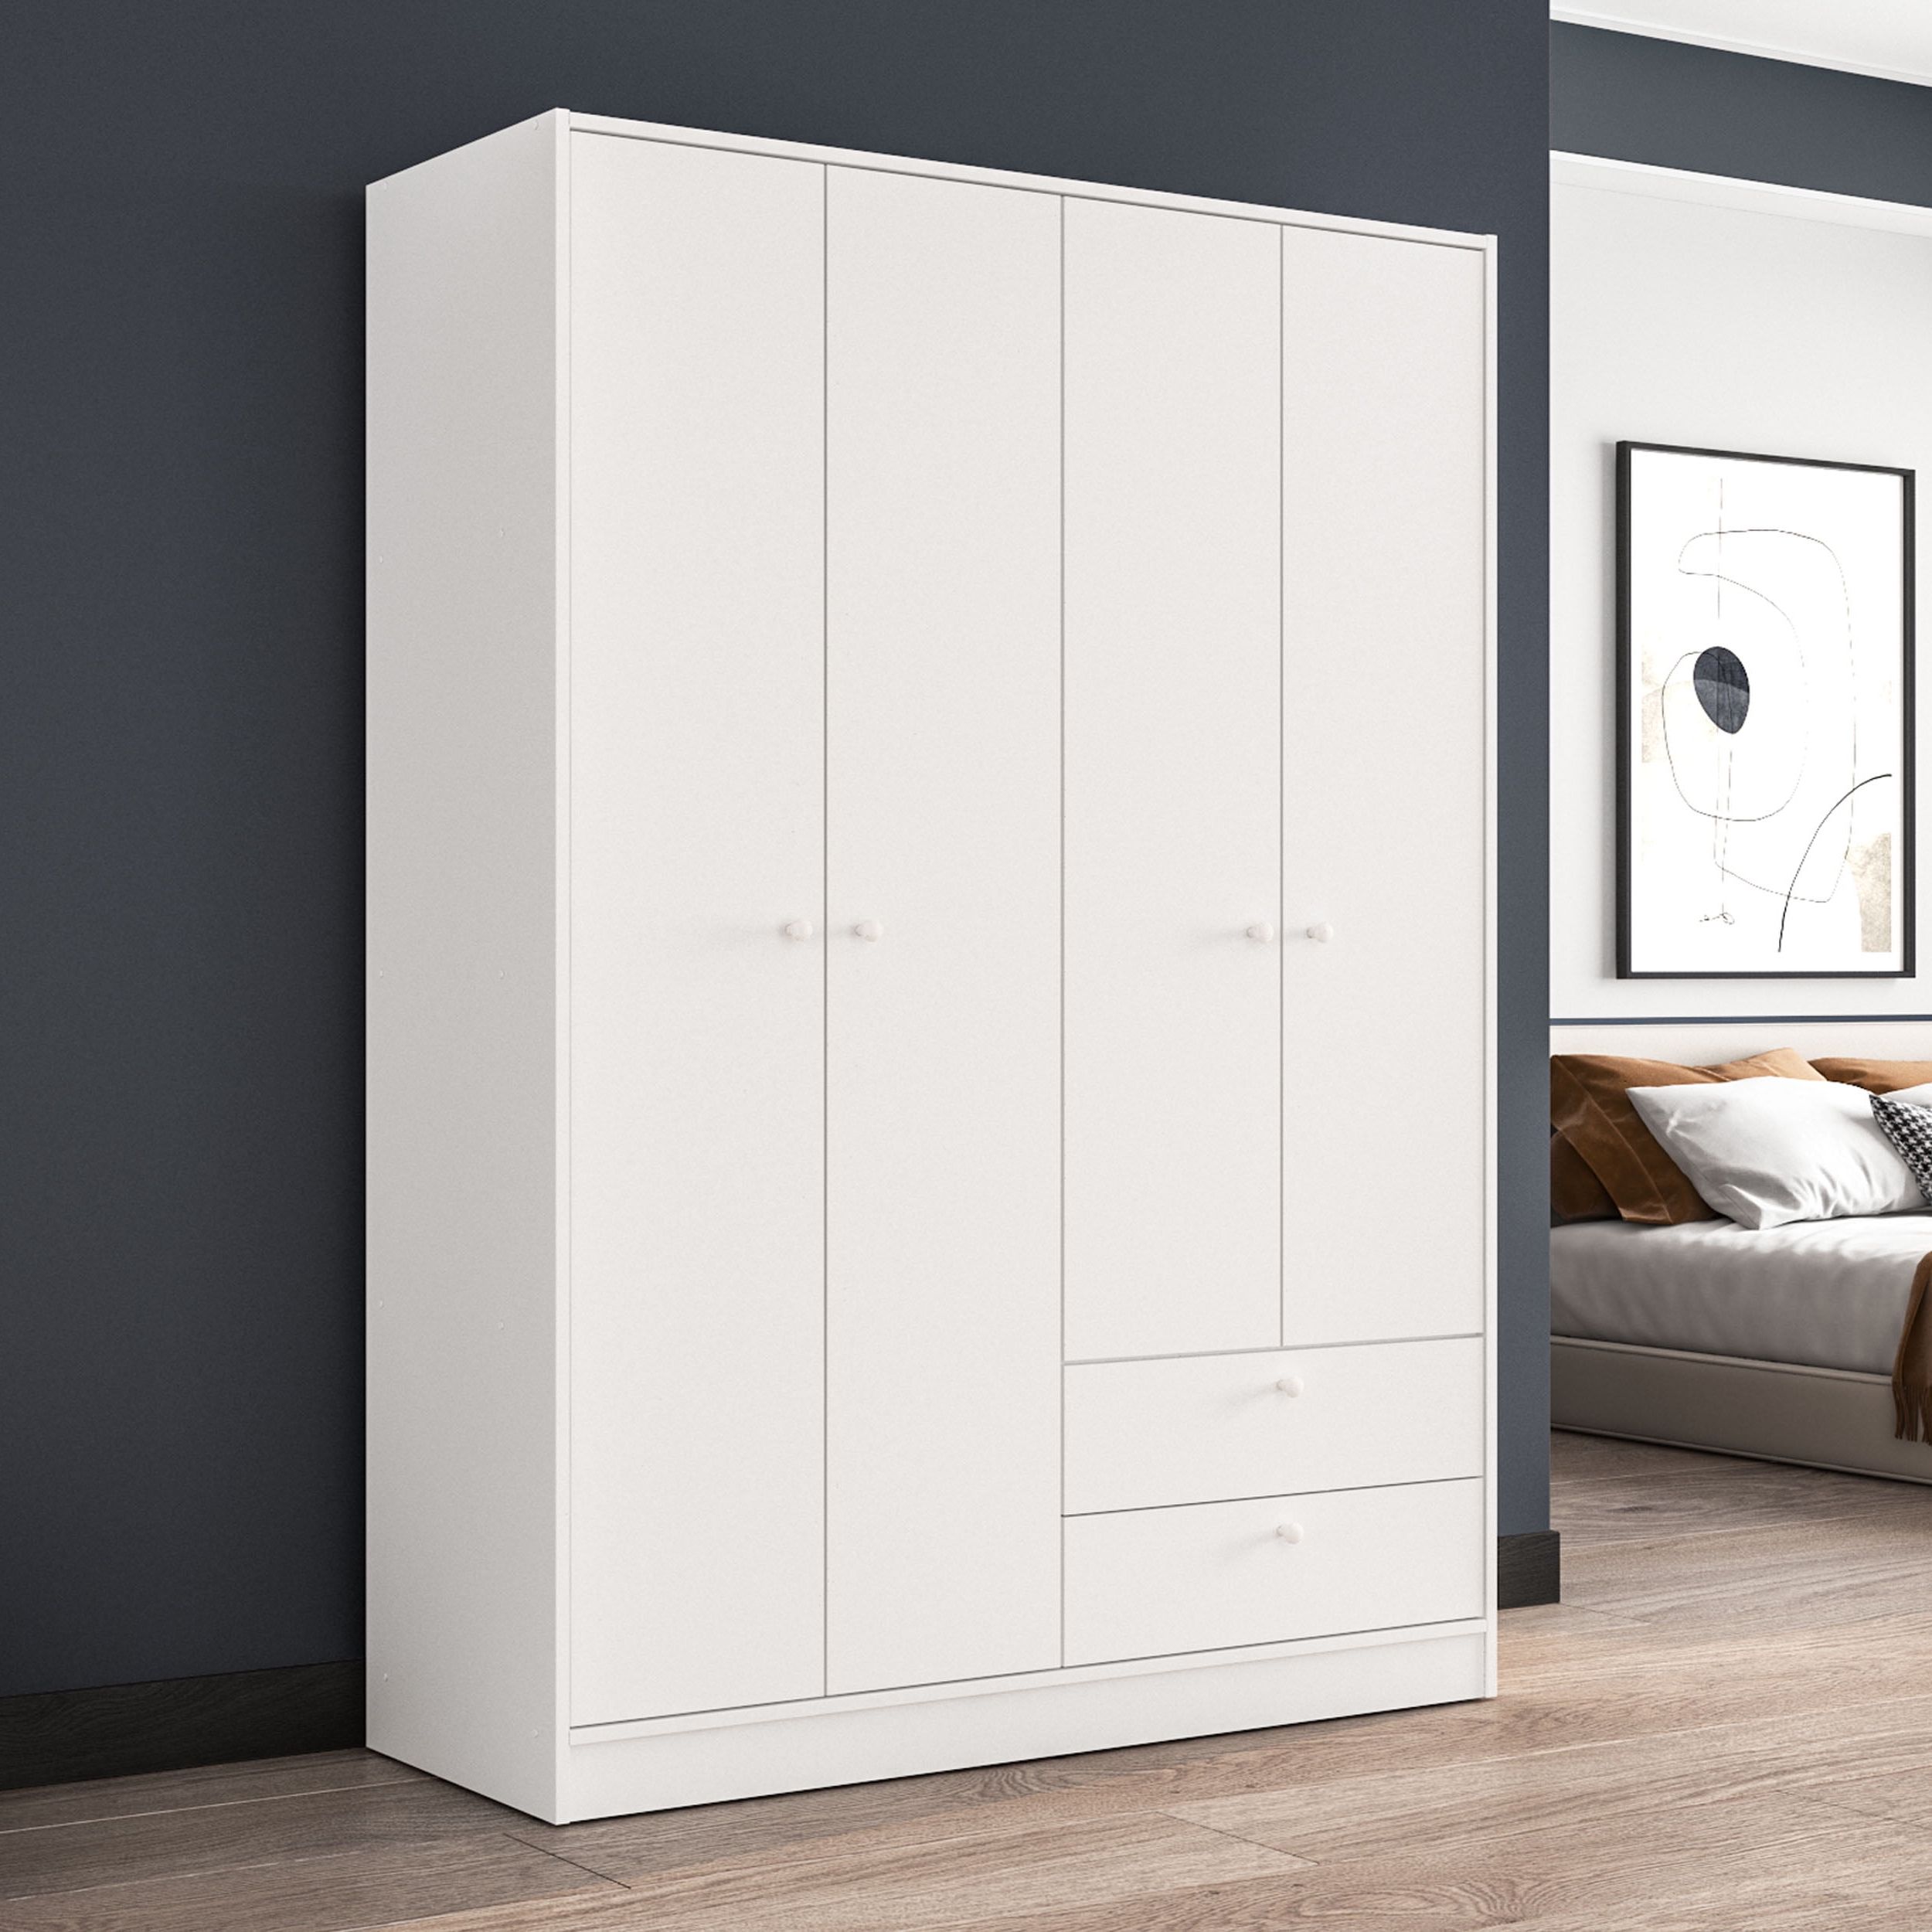 Polifurniture Denmark 4 Door Bedroom Armoire With Drawers, White –  Walmart With Regard To White Wardrobes With Drawers (View 17 of 20)